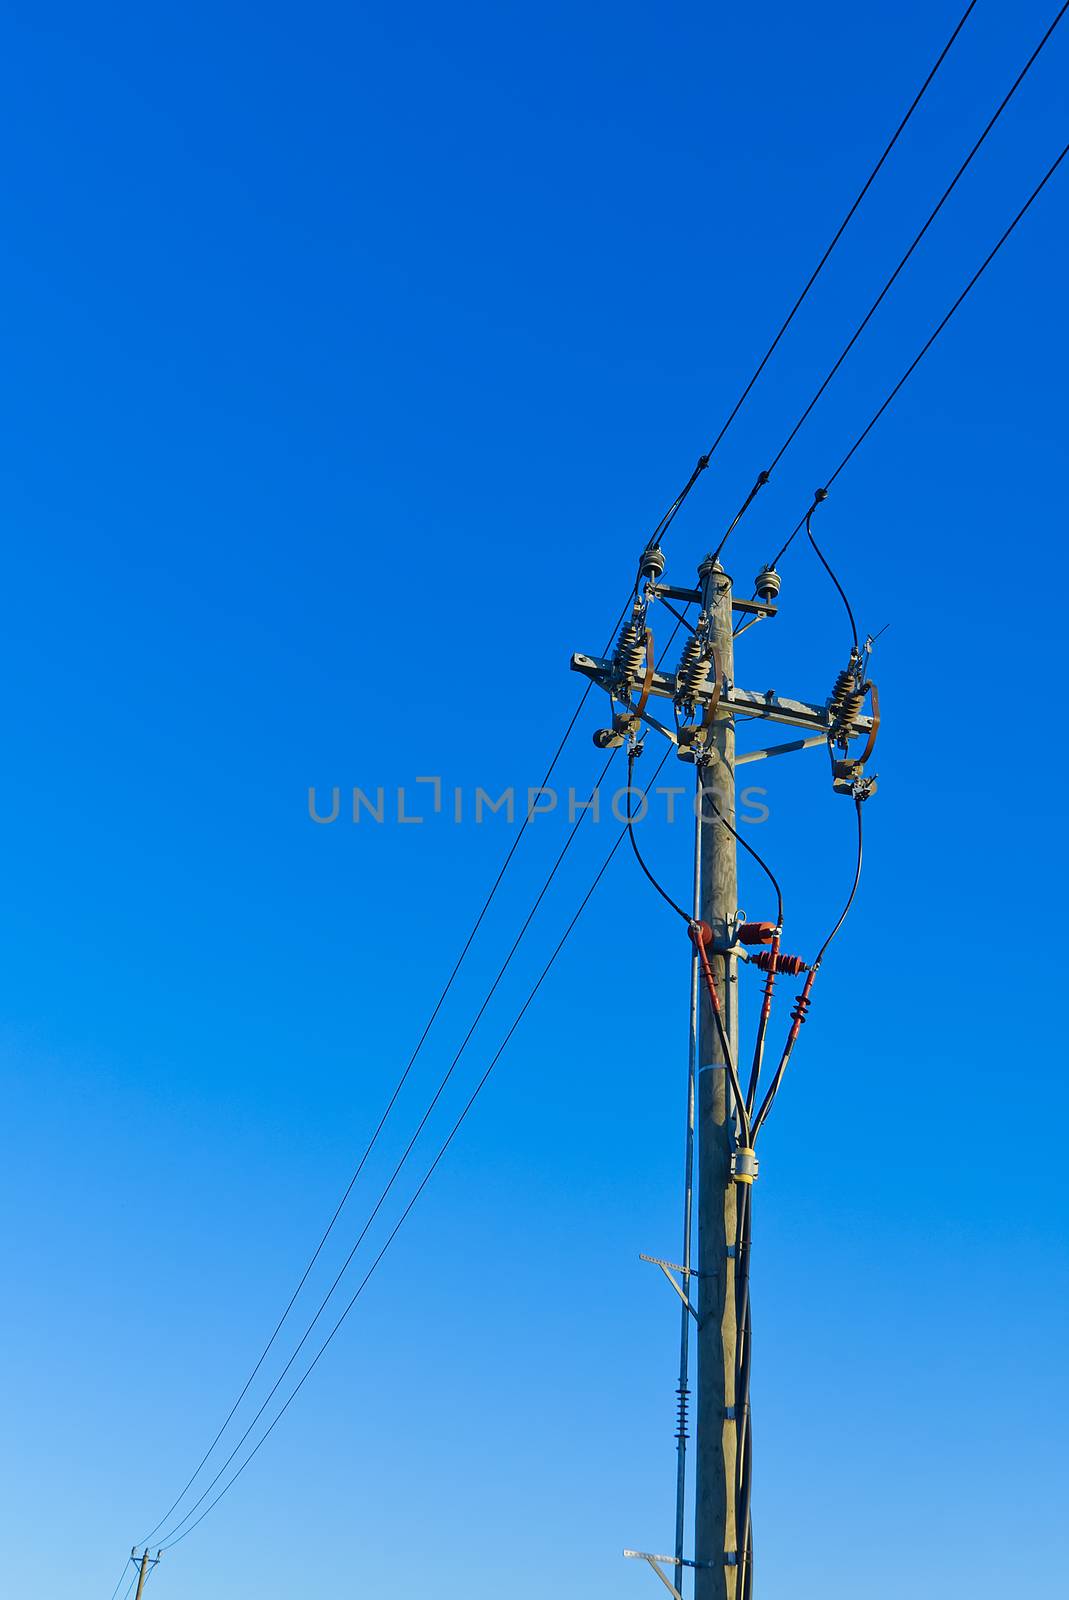 electric power sky lines and connections on a wooden post. Electric power lines and wires with blue sky. wooden electricity post against blue sky.